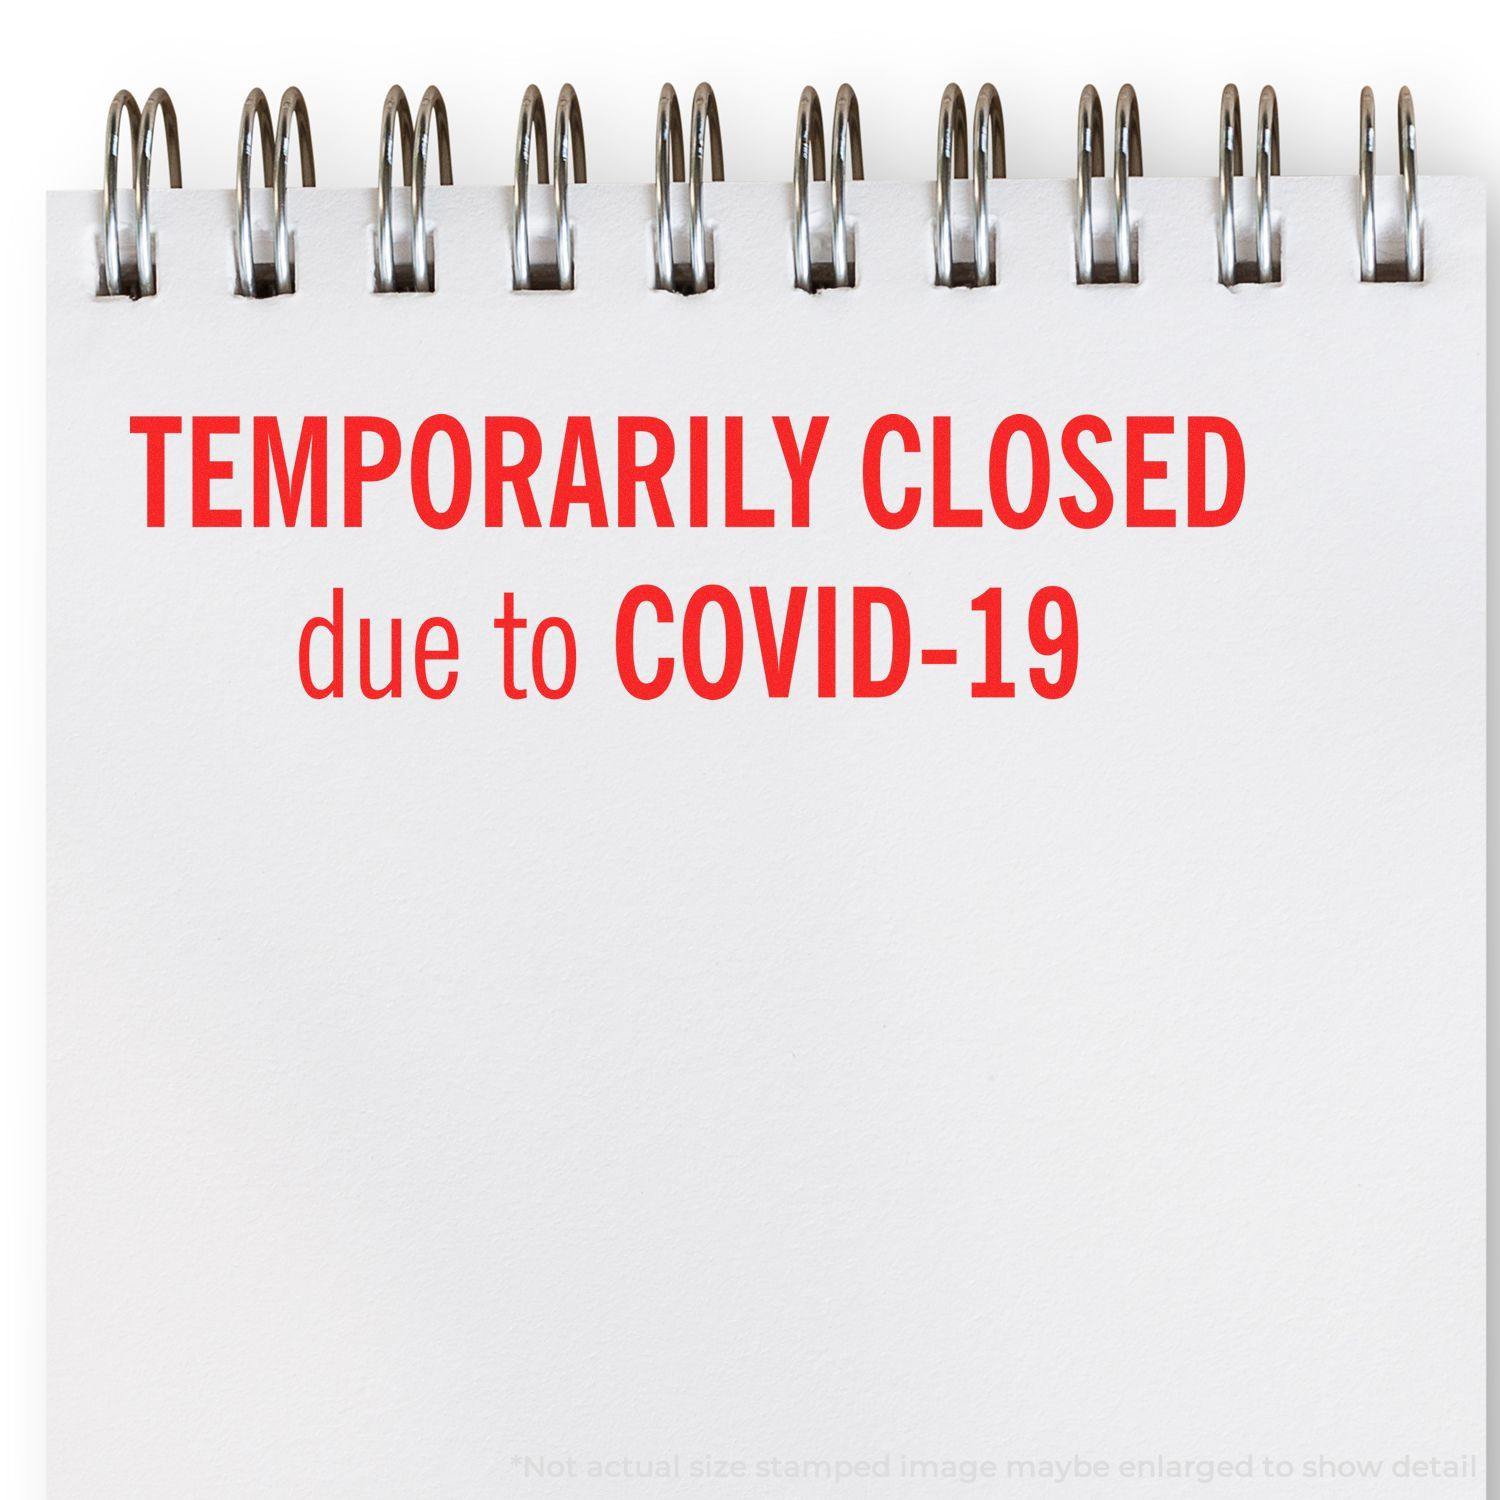 A stock office rubber stamp with a stamped image showing how the text "TEMPORARILY CLOSED due to COVID-19" in a large font is displayed after stamping.